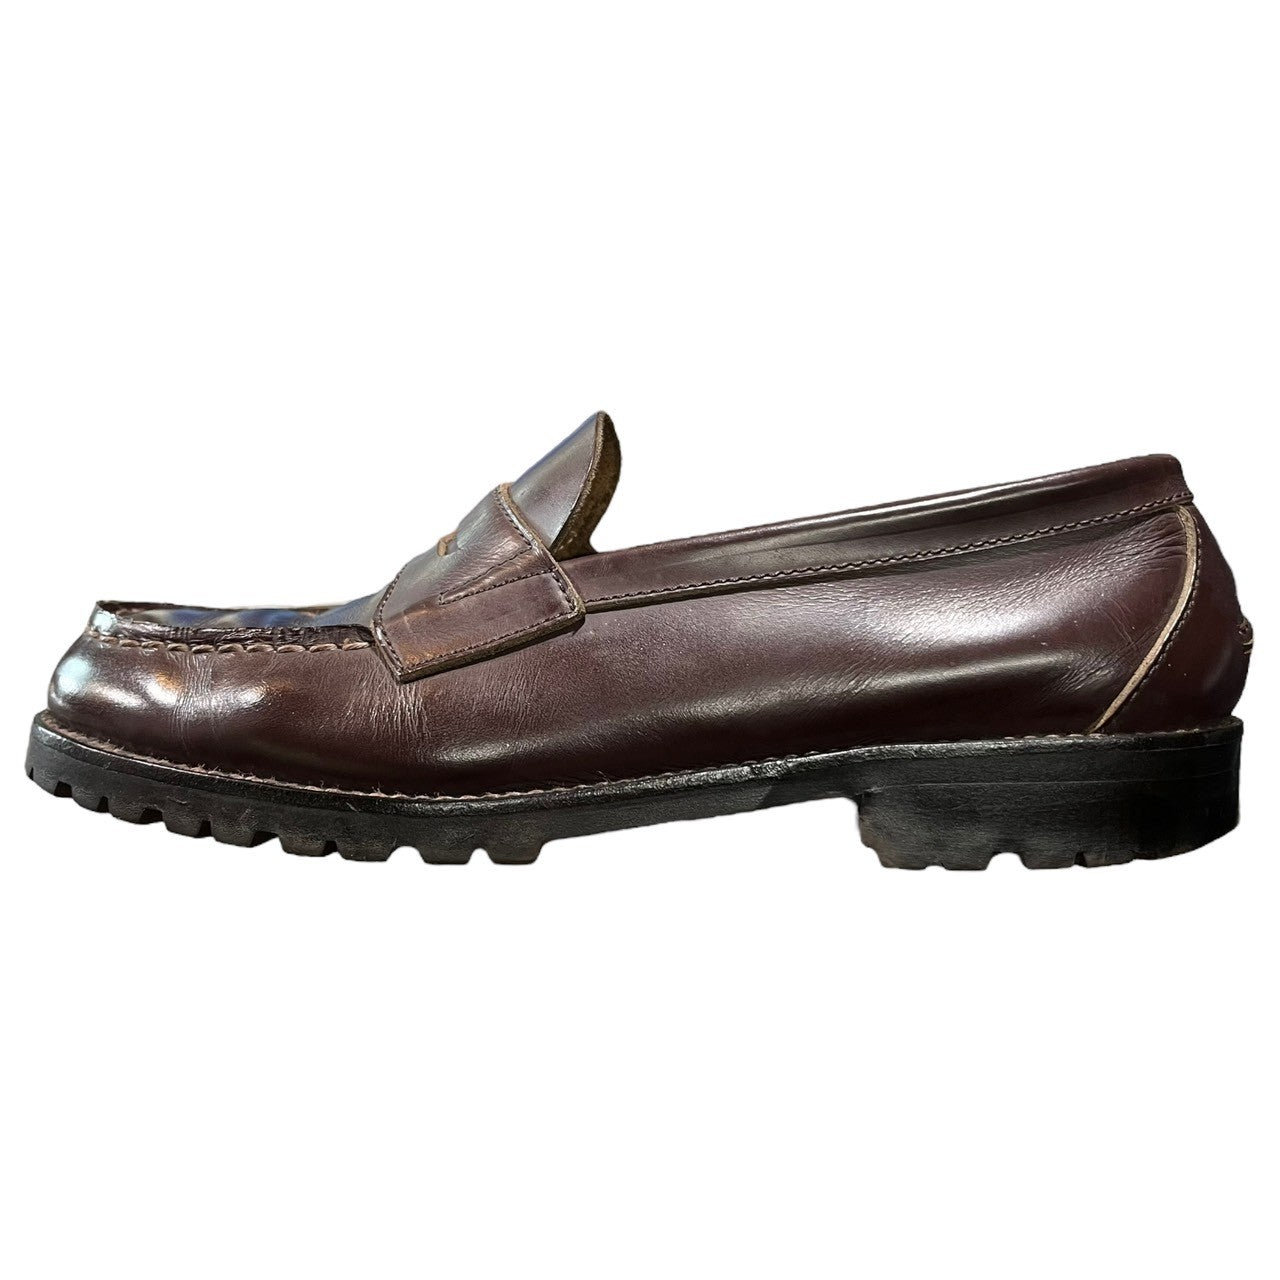 COMME des GARCONS HOMME(コムデギャルソンオム) 00s command sole  loafers/コマンドソールローファー/革靴 SIZE表記消え(推定24.5cm程度) ブラウン 日本製